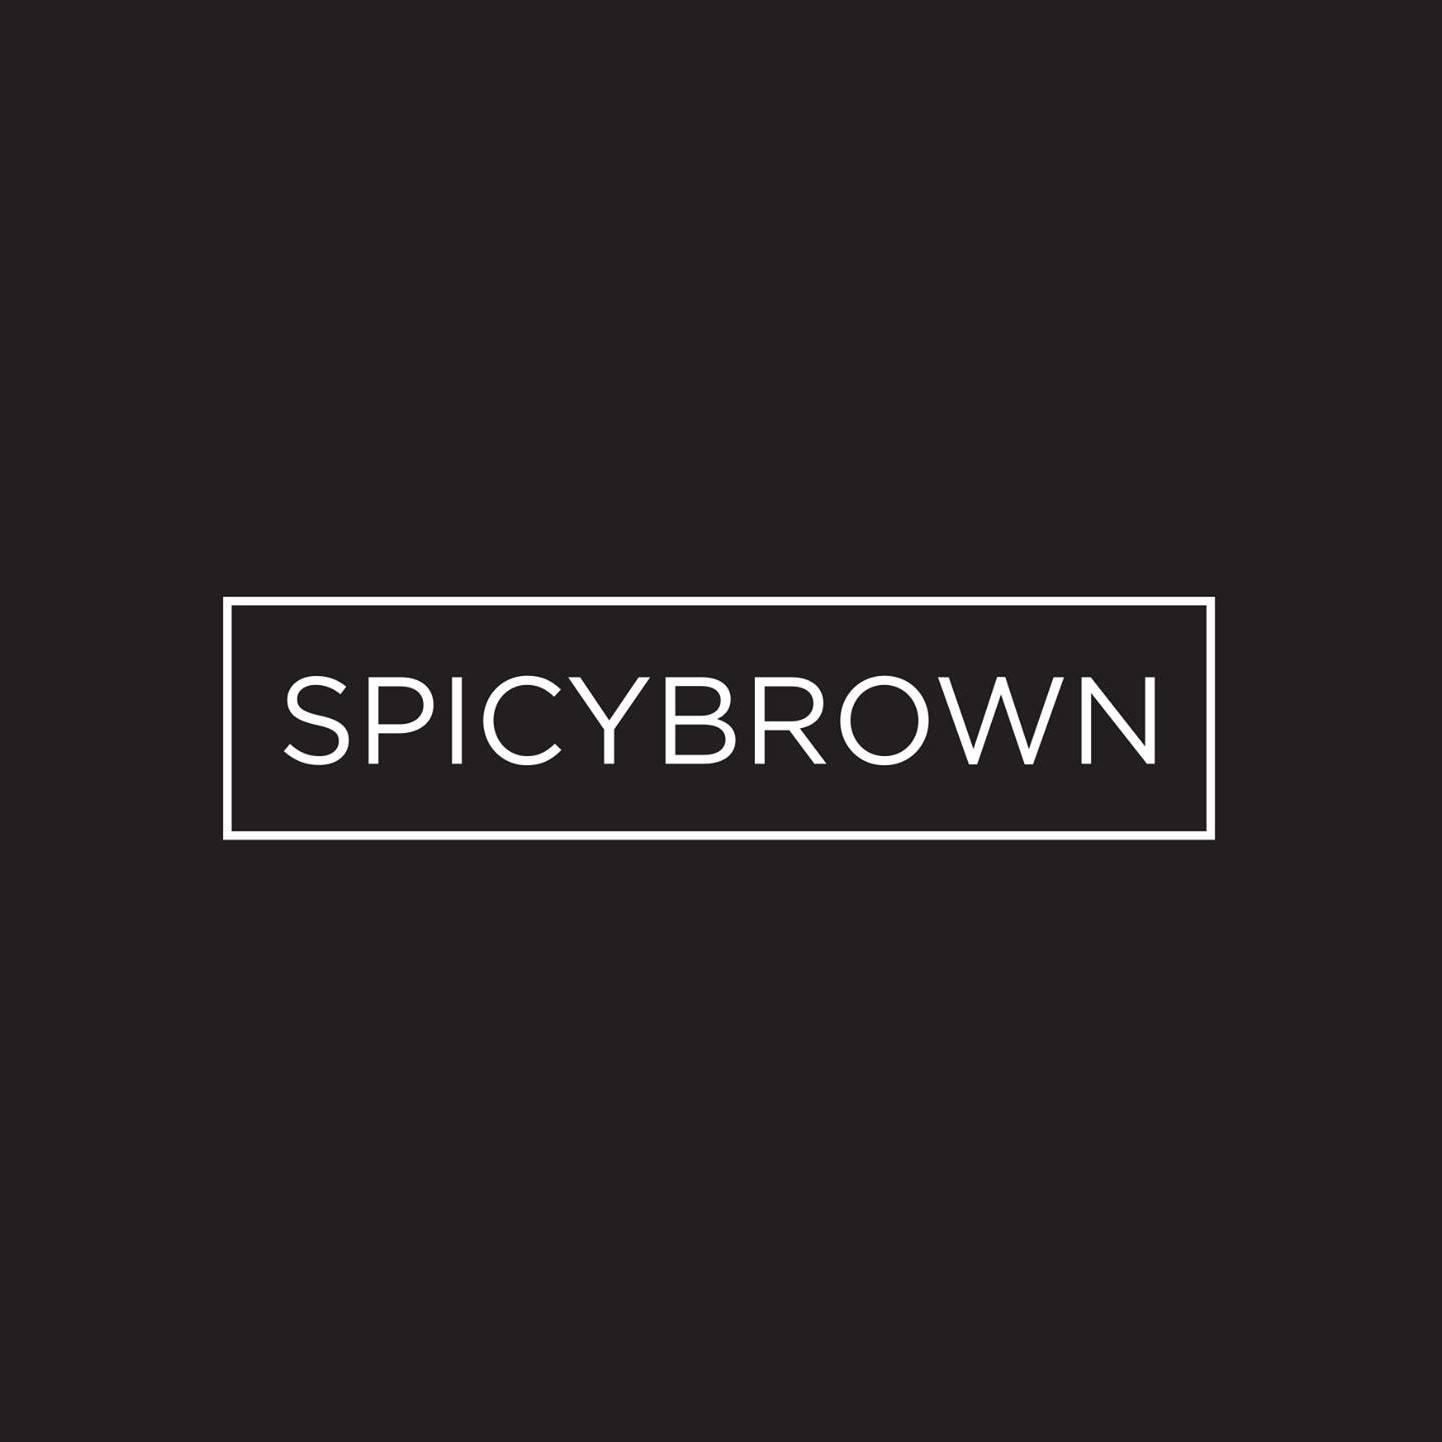 Spicy Brown